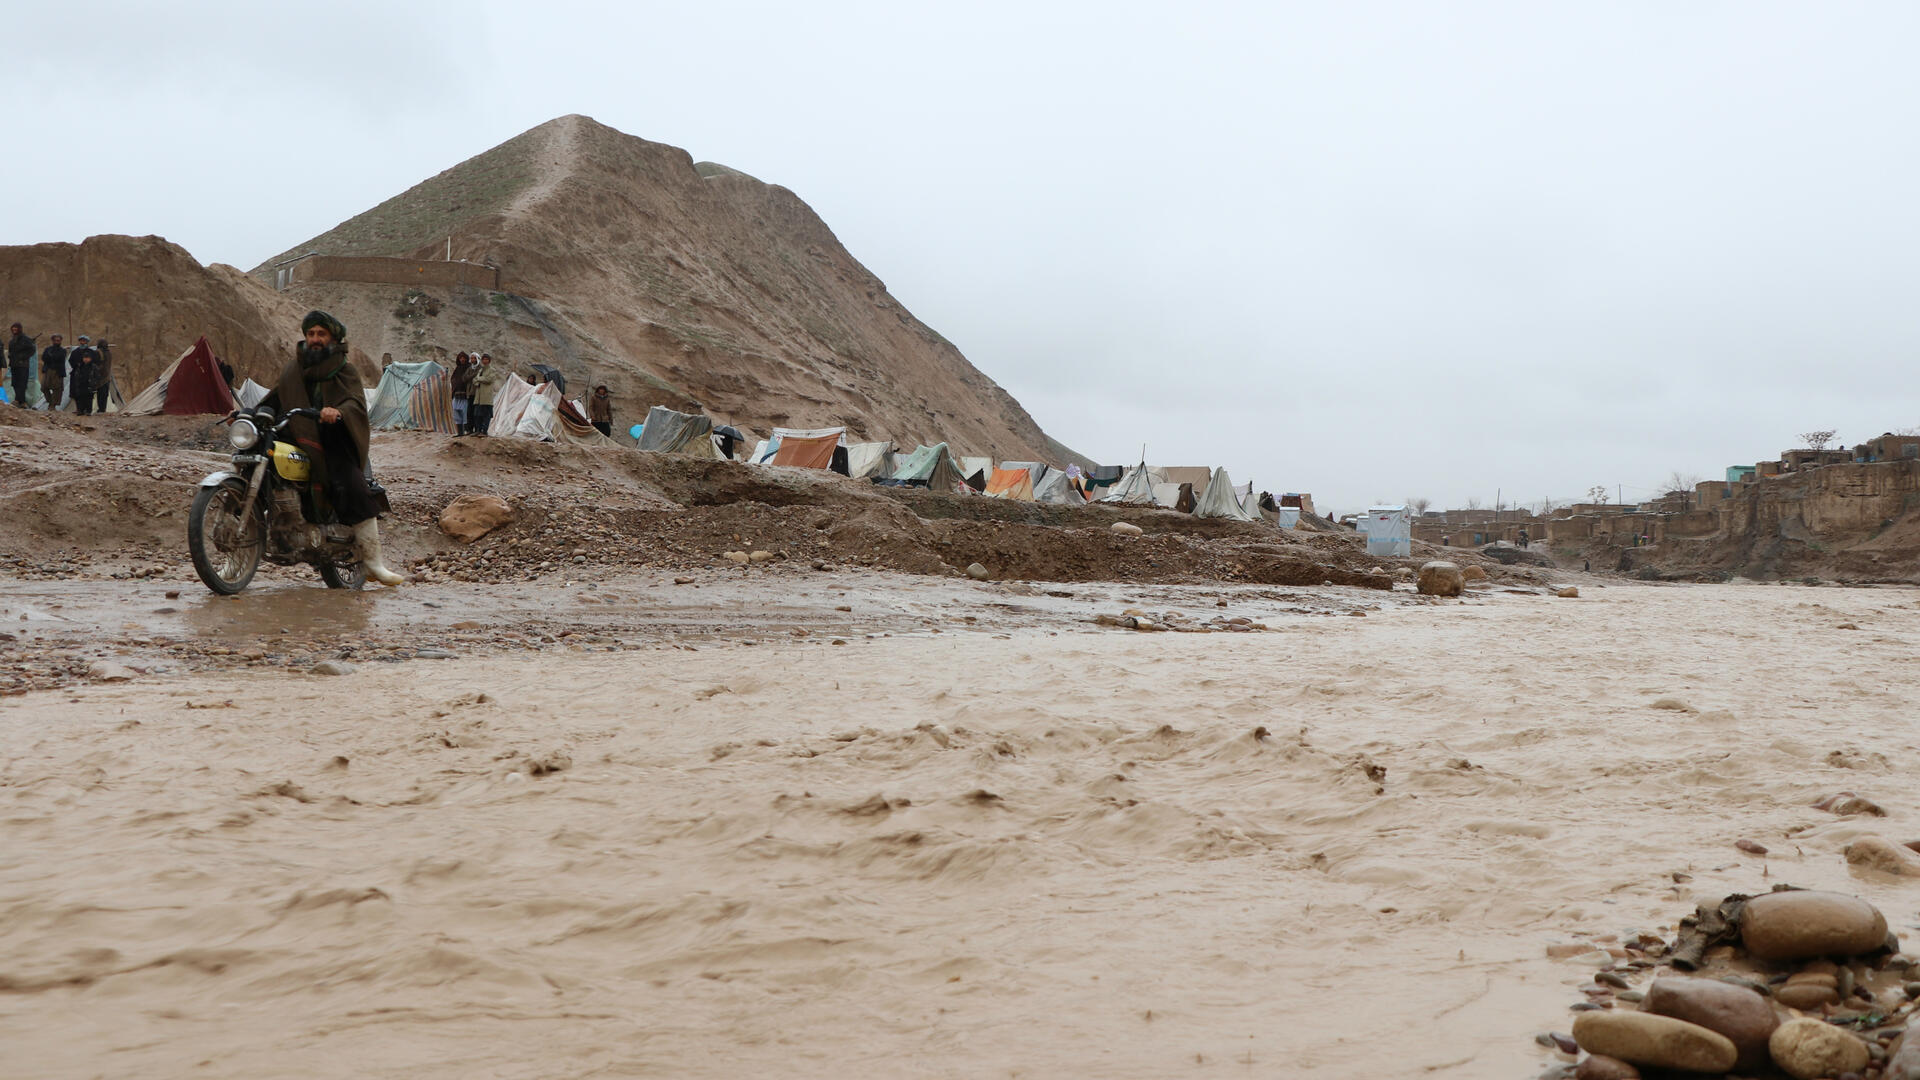 A man rides a motorcycle past muddly floodwaters in a tent camp in Afghanistan under gray skies